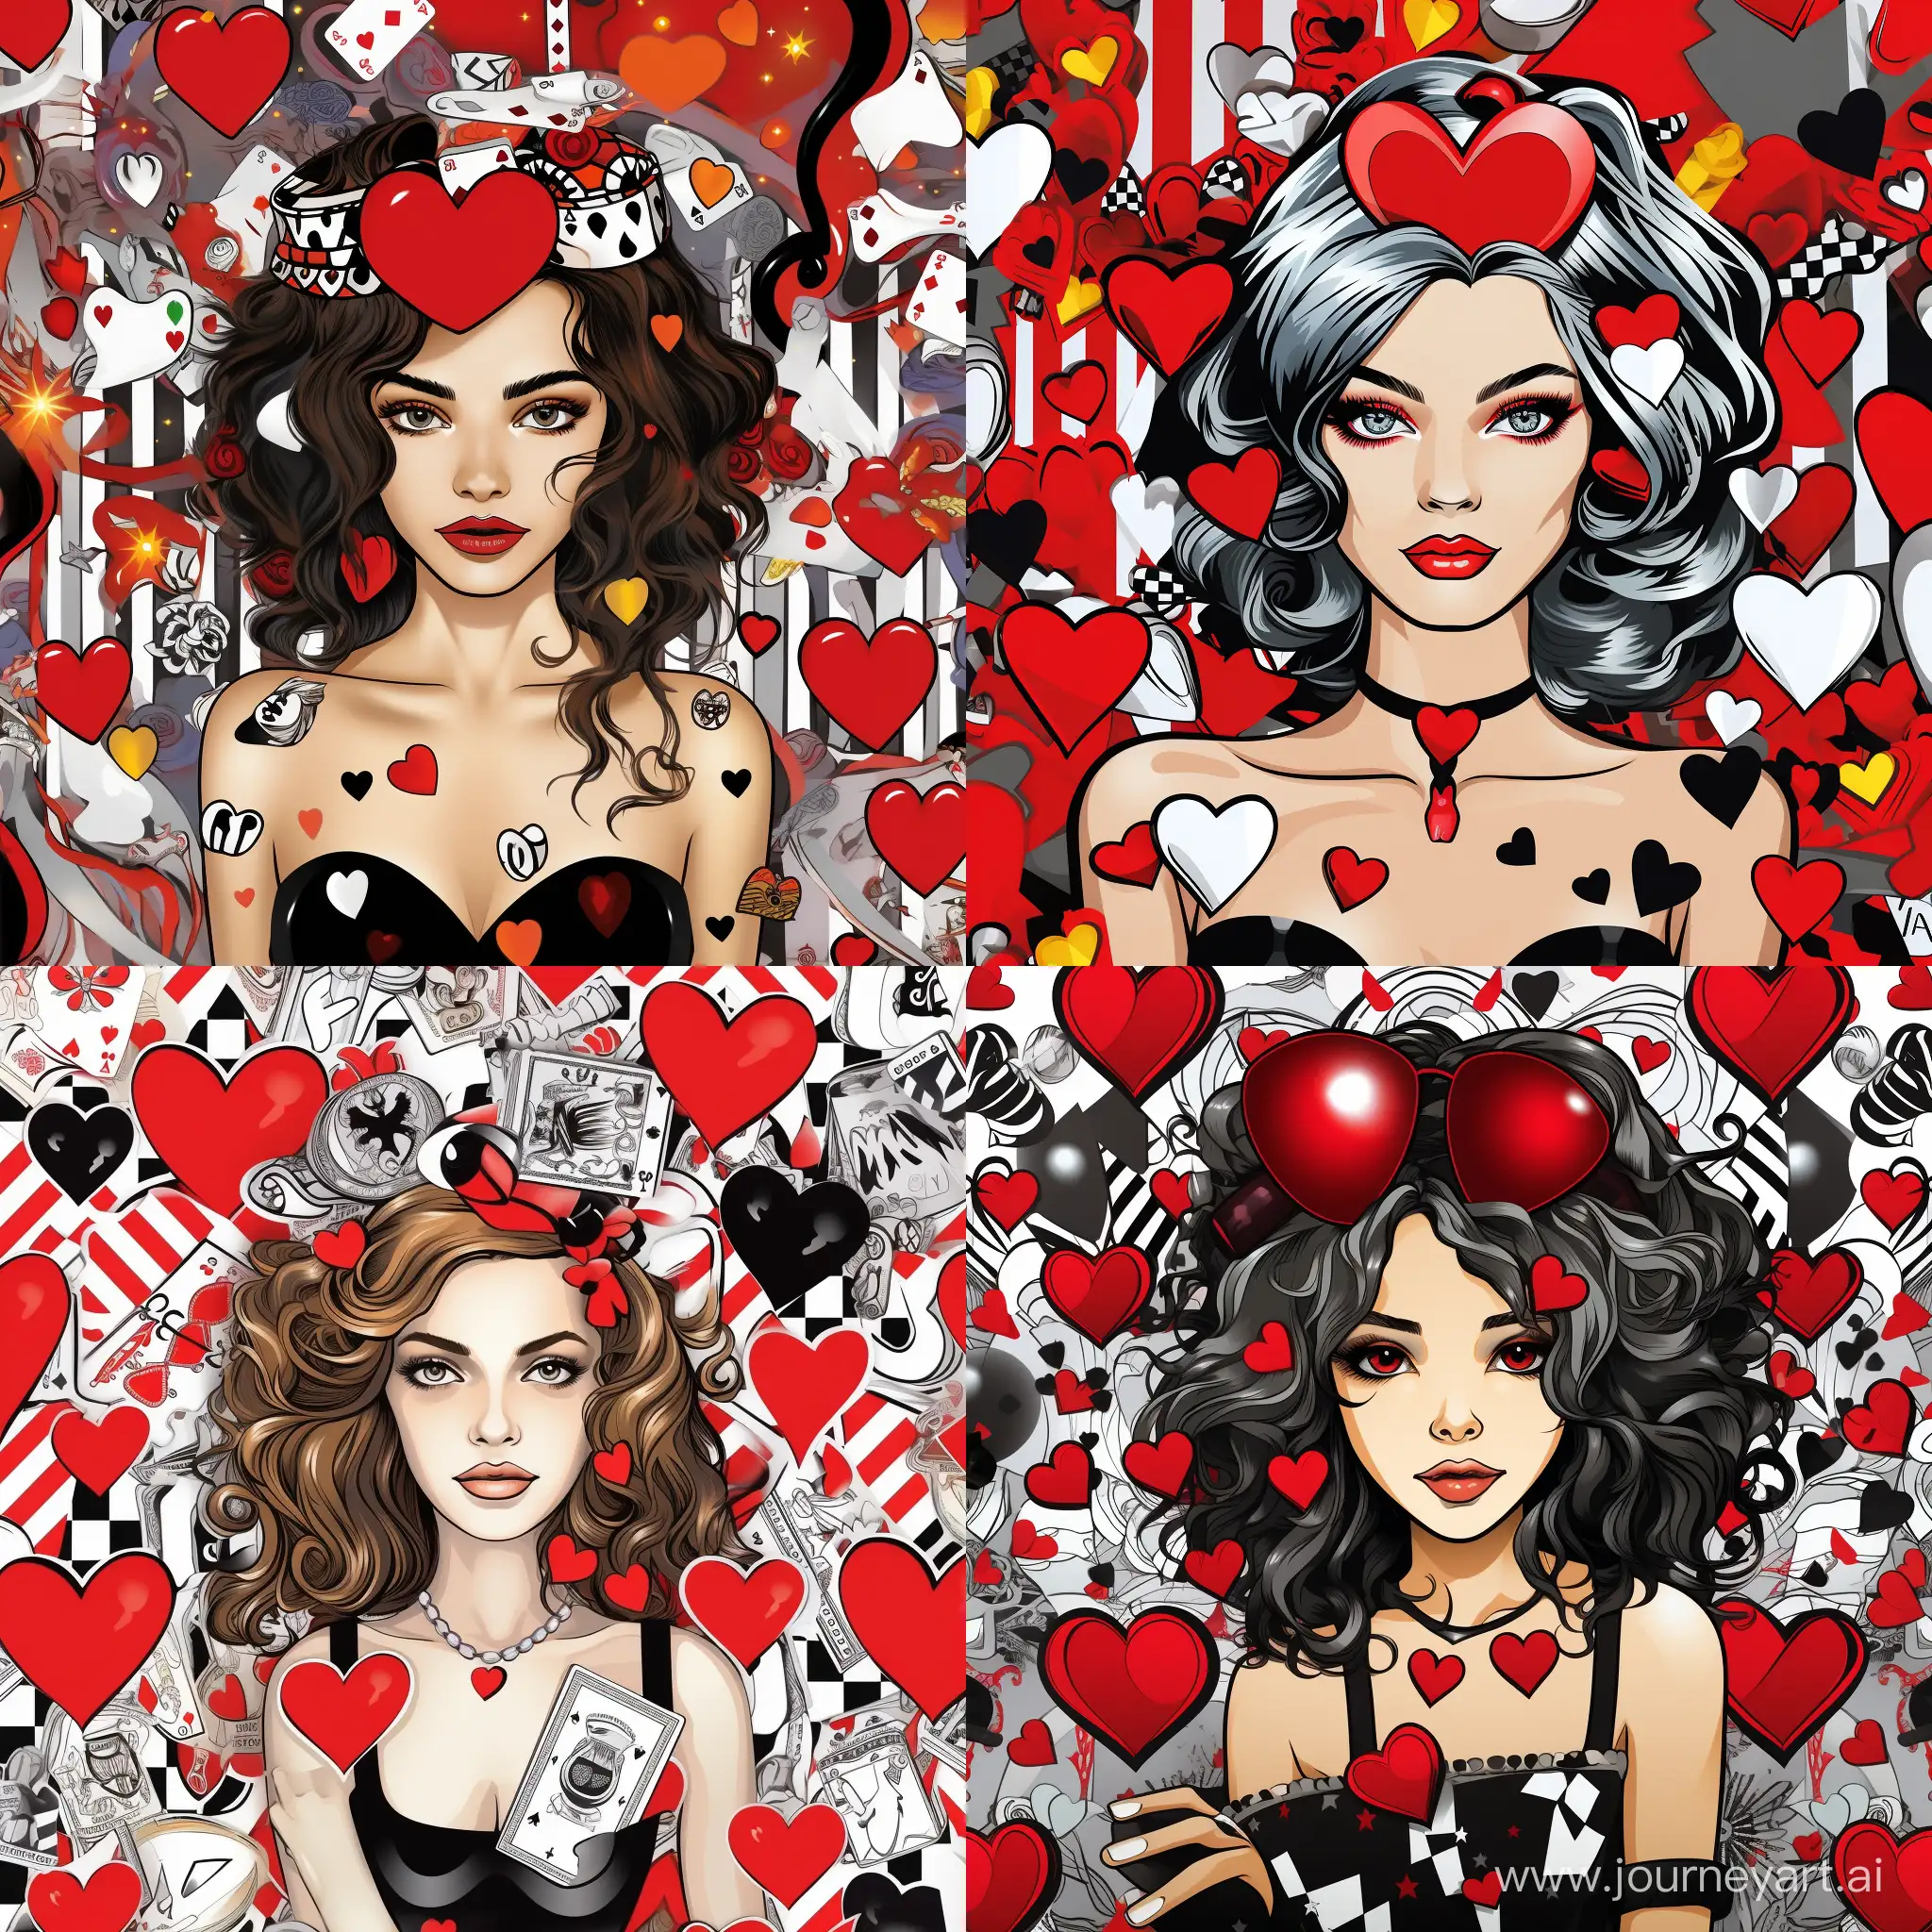 Portrait of Gaby Agyen with a crown on her head, many details, complex, on the background of a pattern of hearts, accessories from Chloe, colors black, white, red, gray, caricature, cartoon style, pop art style, fashion illustration style